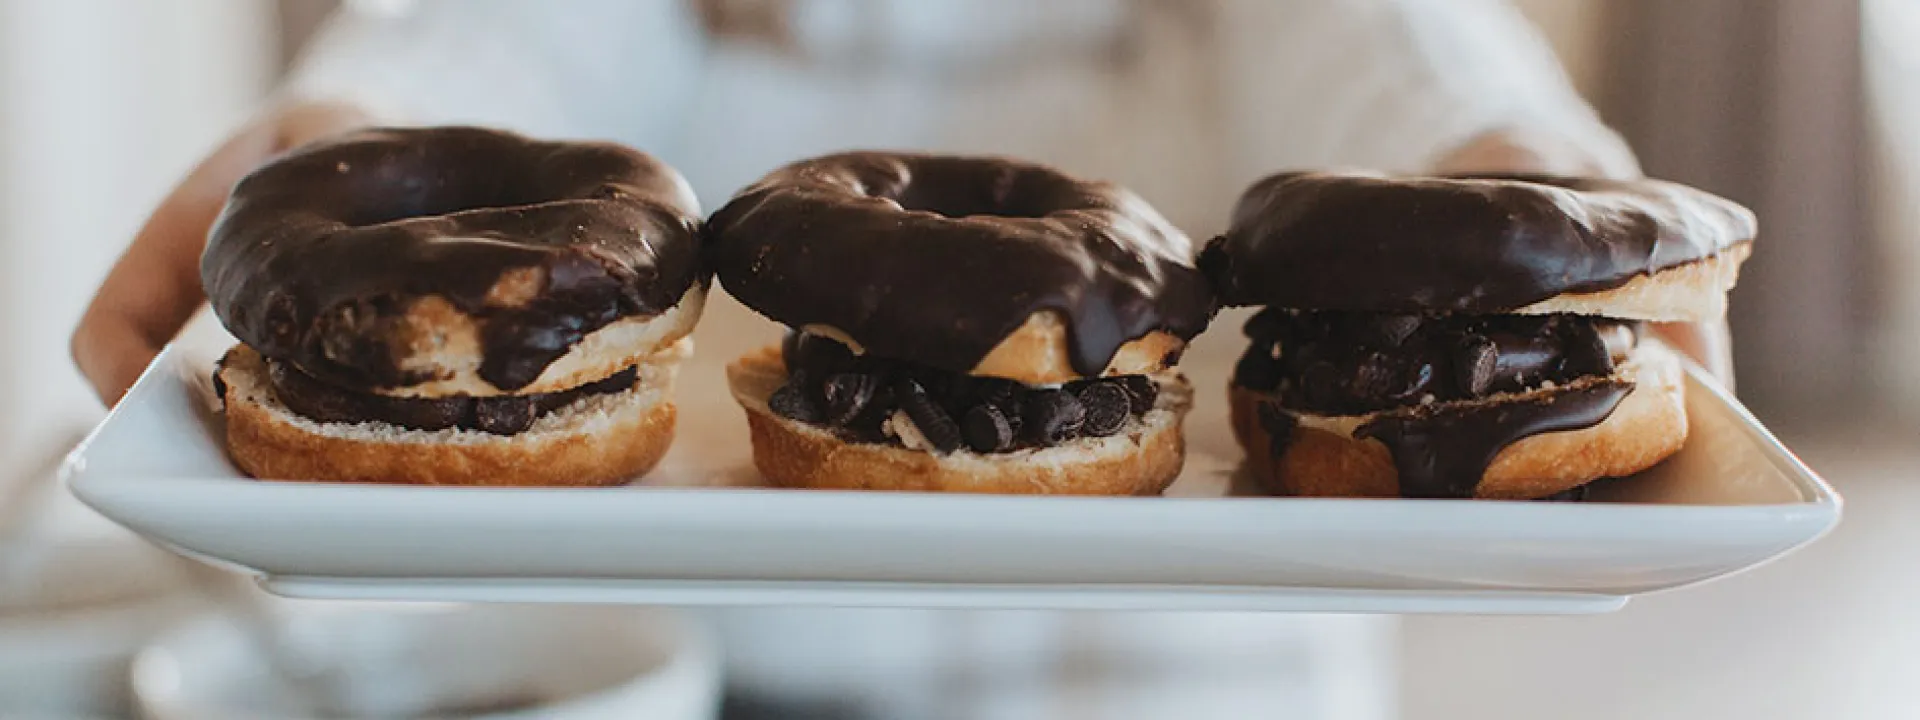 Chocolate frosting on donuts served with Wesley Andrews coffee